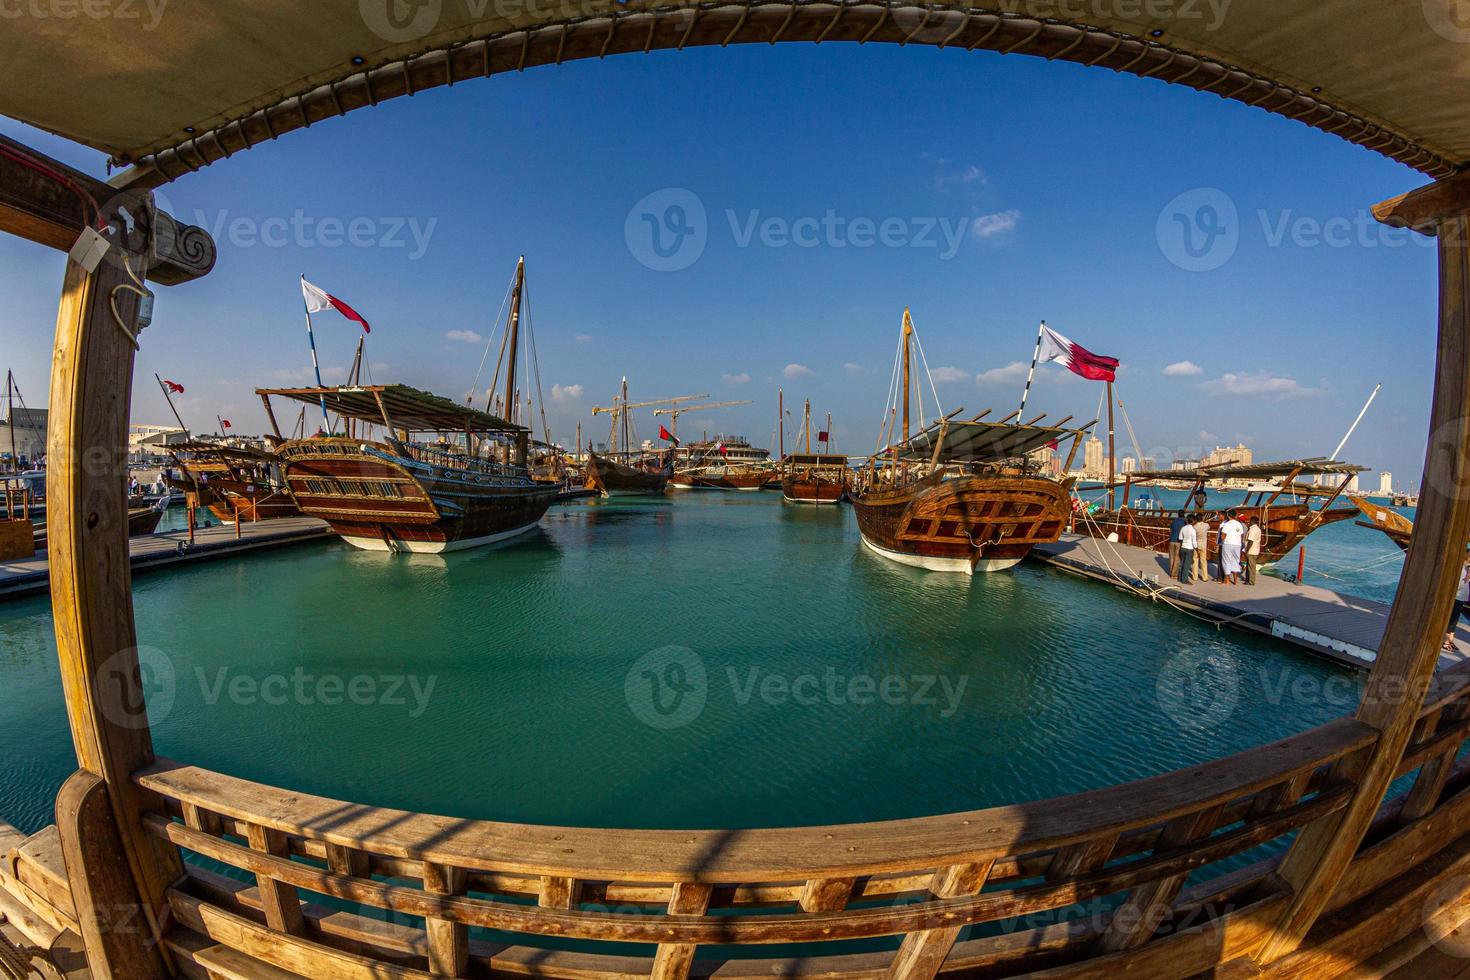 Traditional wooden boats ,dhows, in Katara beach Qatar daylight view with Qatar flag and clouds in sky photo